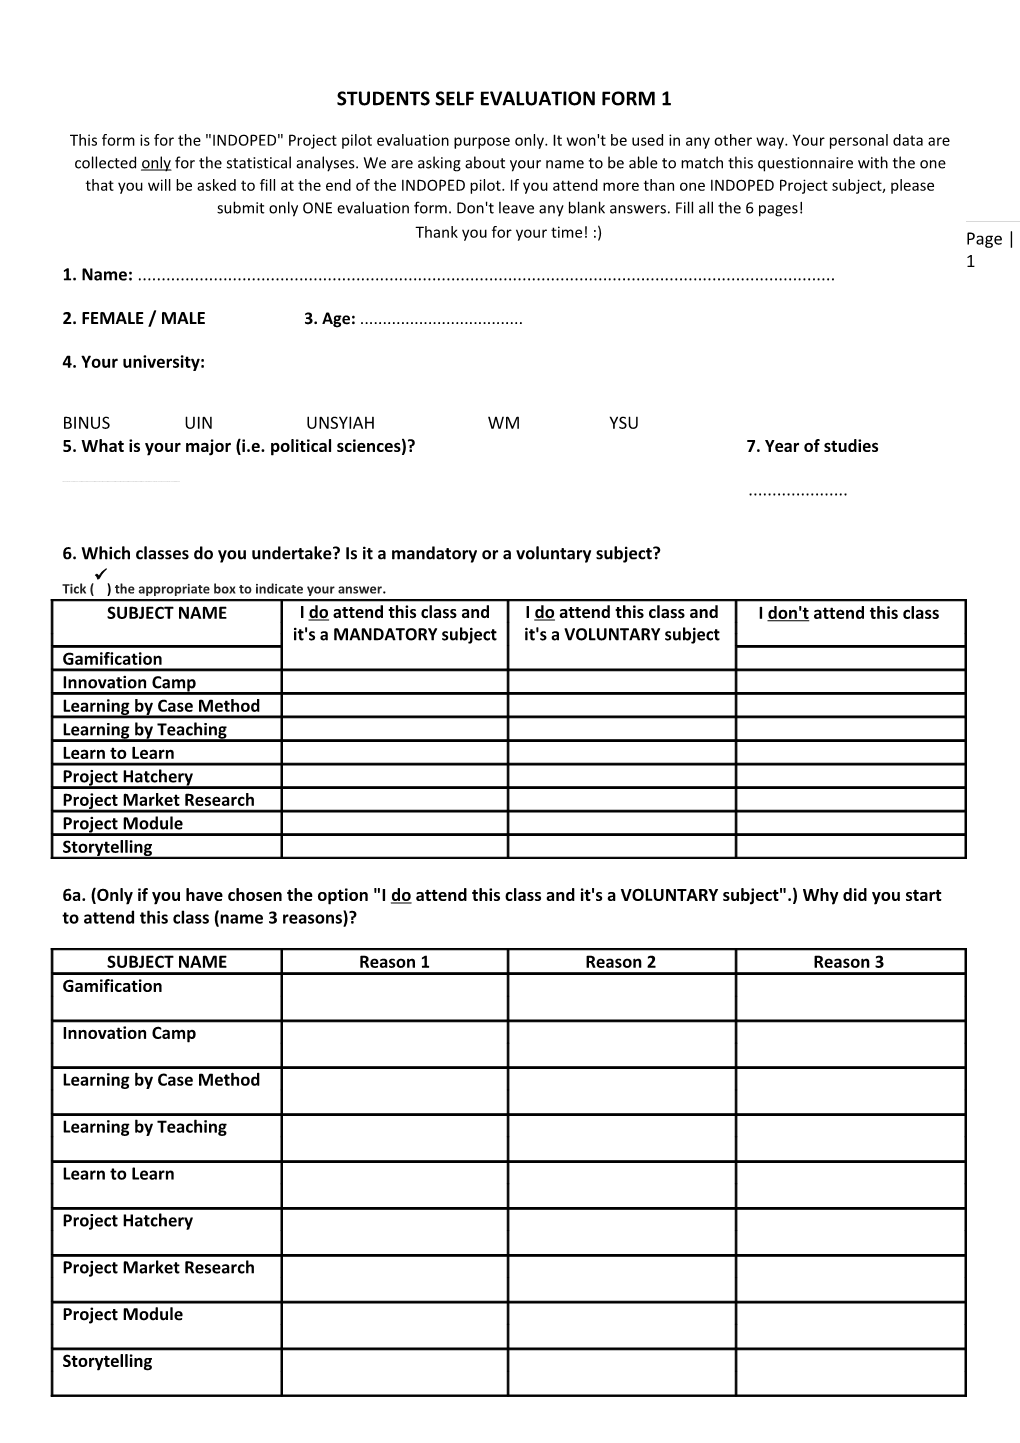 Students Self Evaluation Form 1